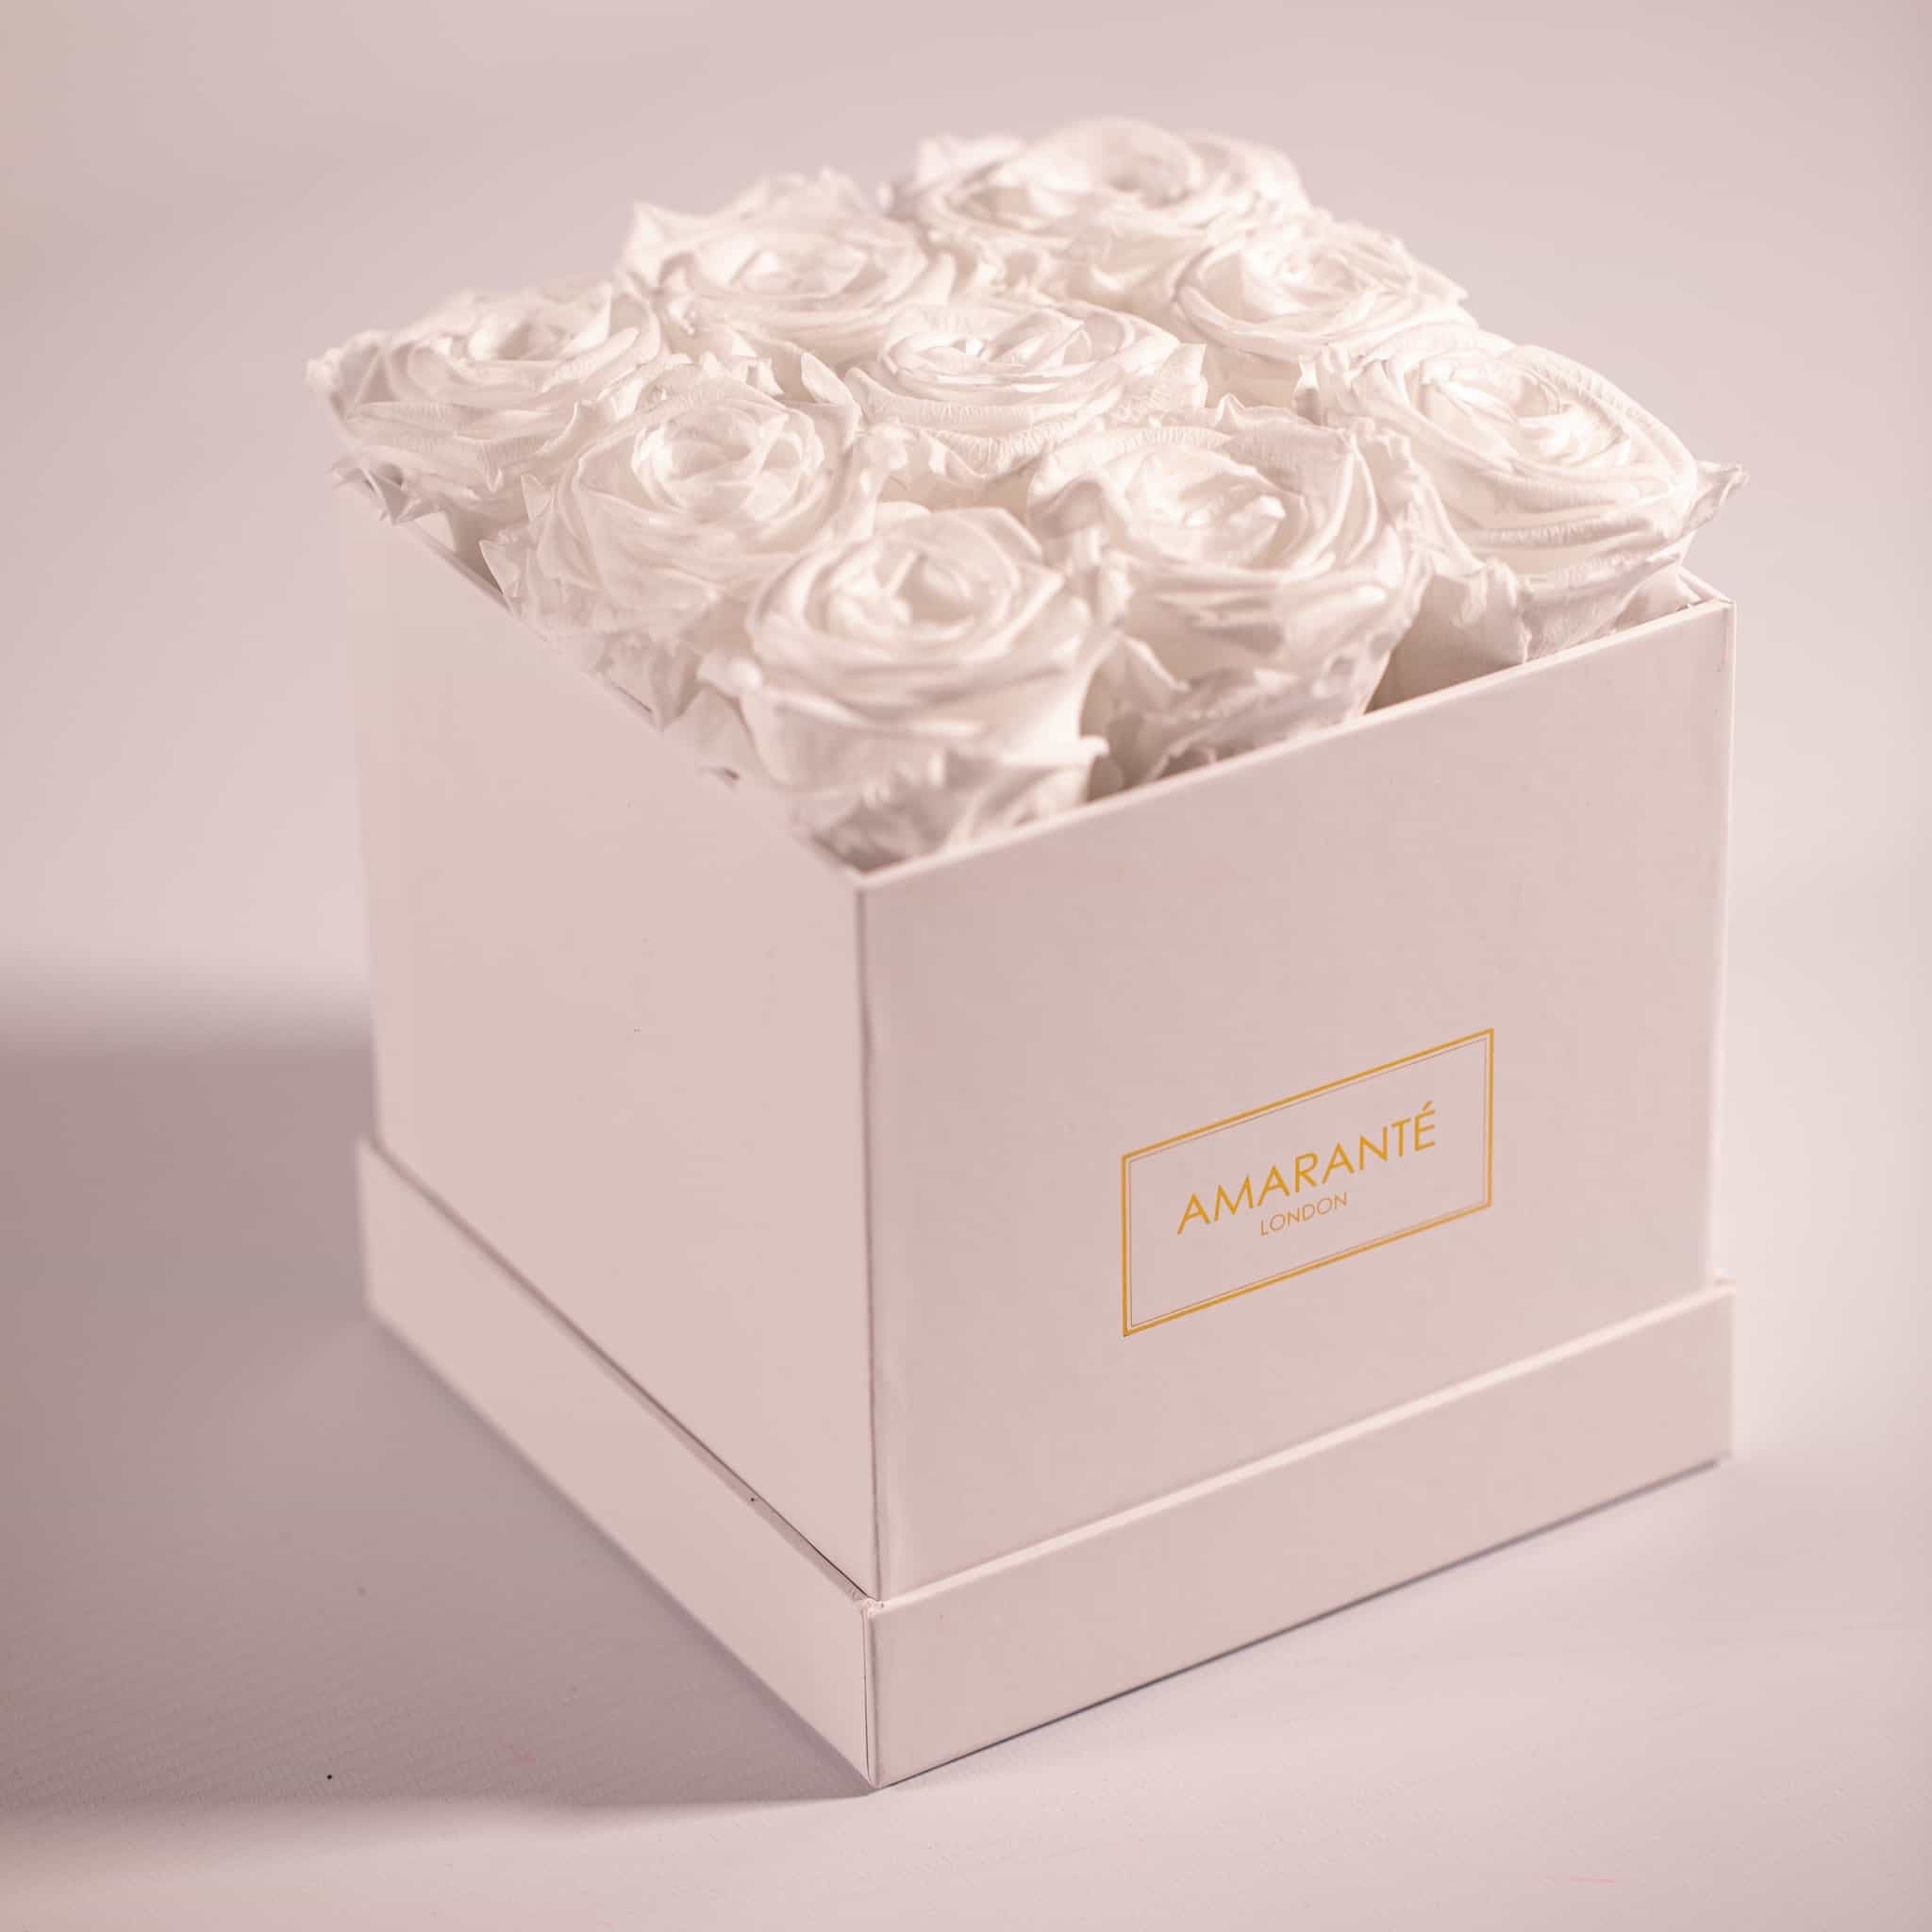 Luxury Wedding Flowers That'll Make The Day Truly Memorable for Years